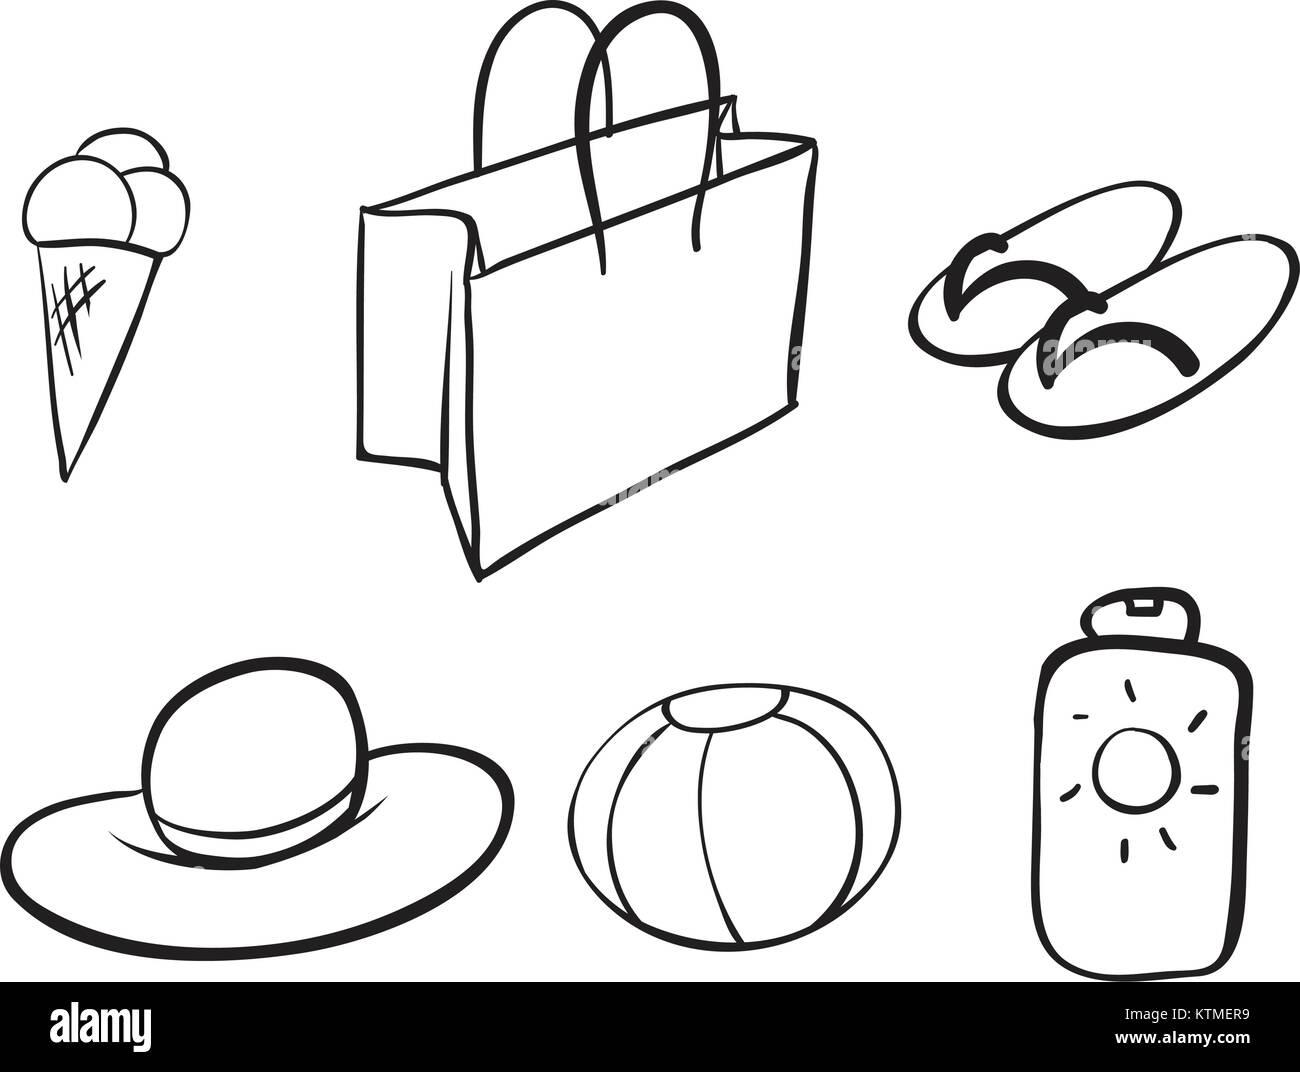 illustration of various objects on a white background Stock Vector ...